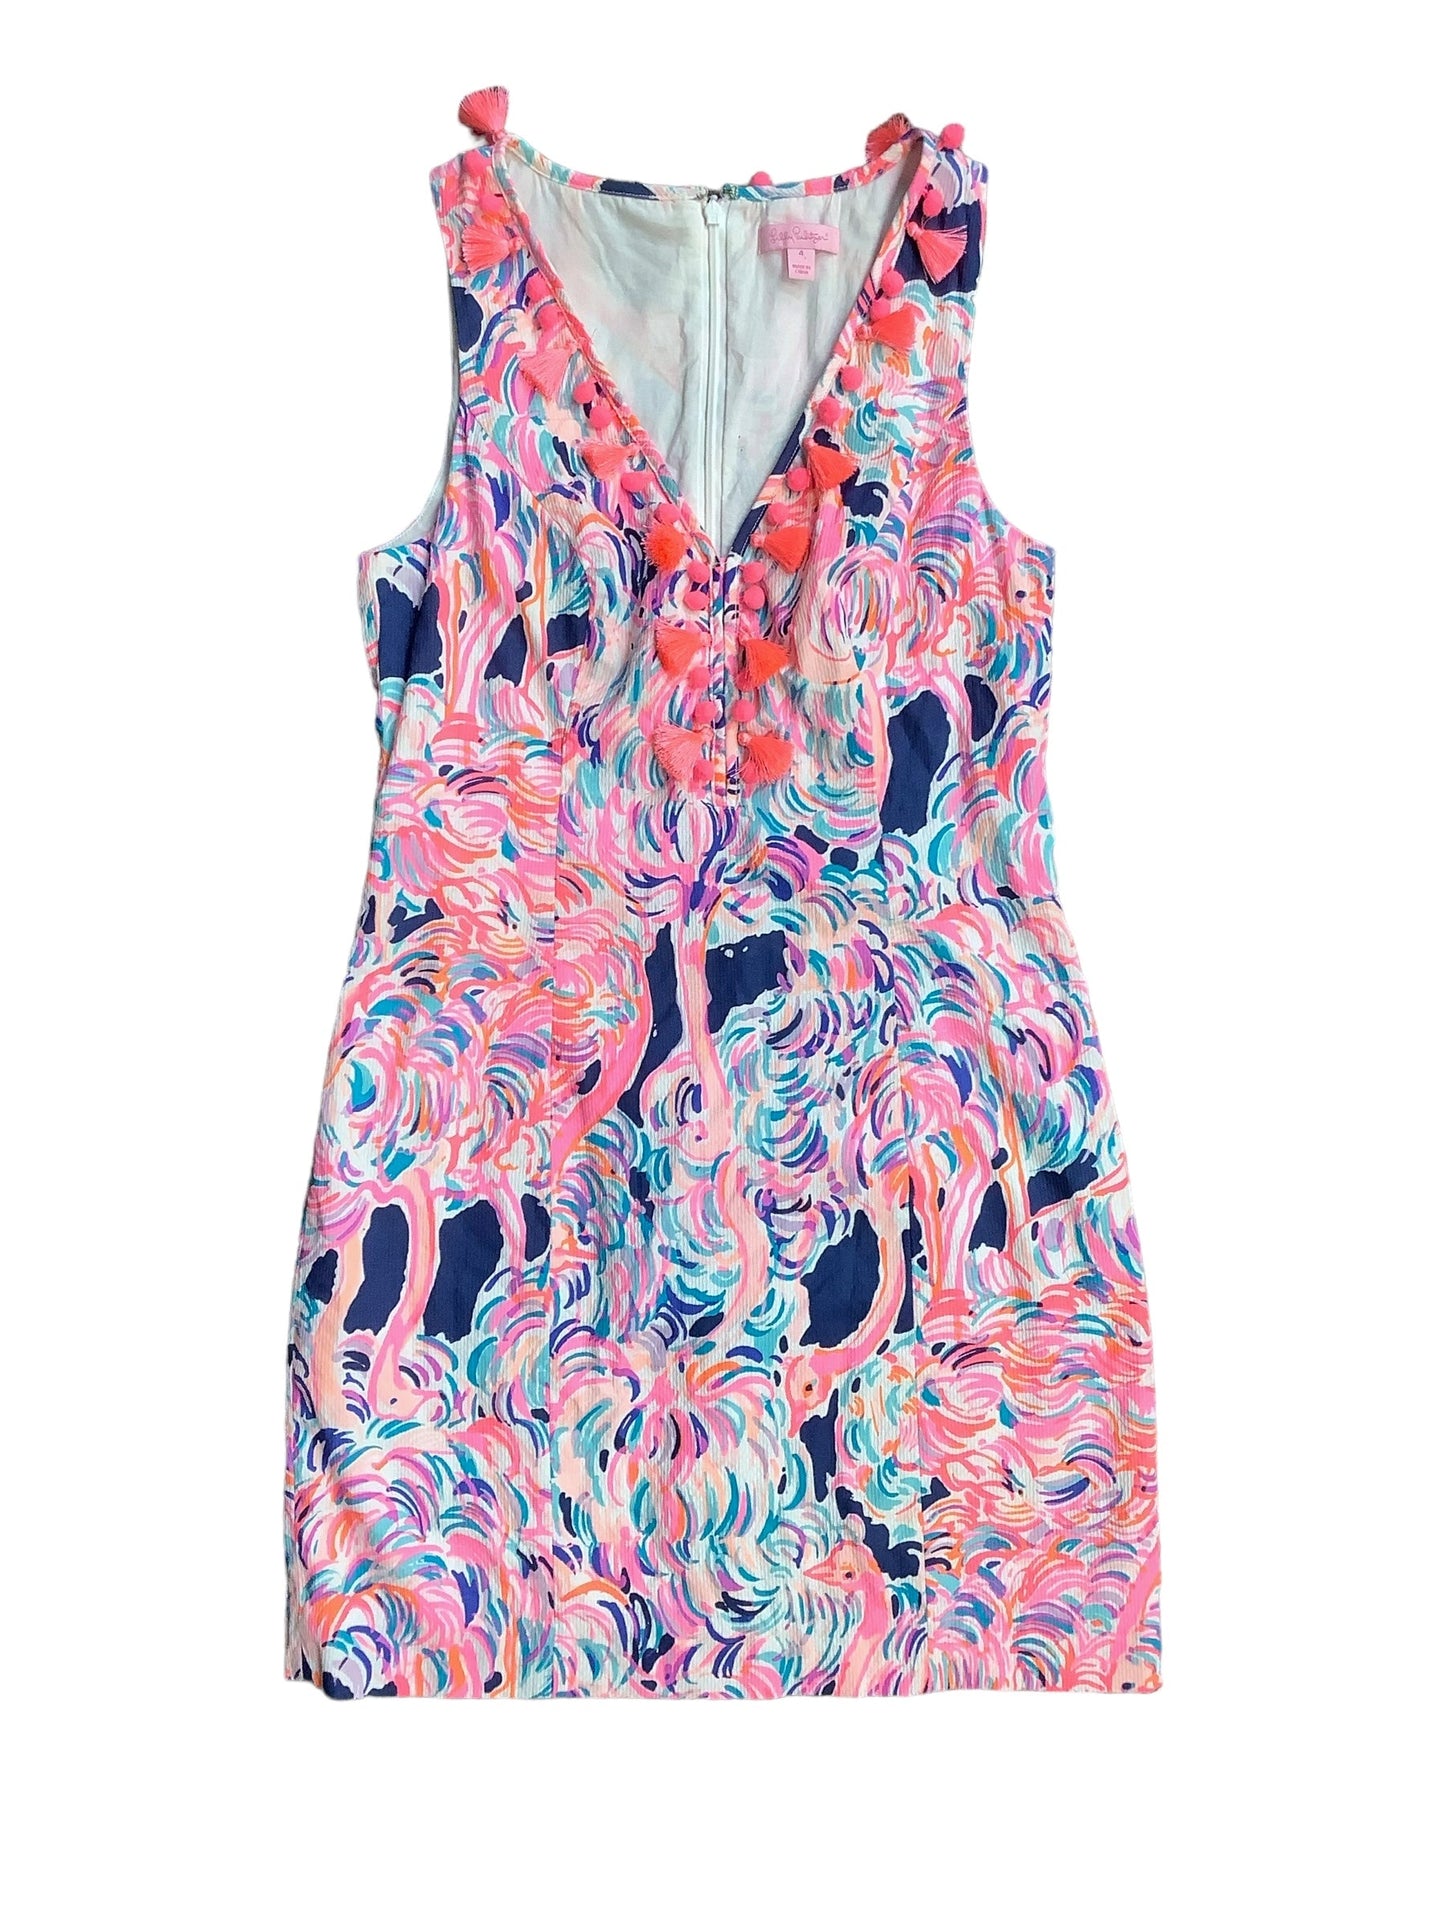 Multi-colored Dress Casual Short Lilly Pulitzer, Size 4